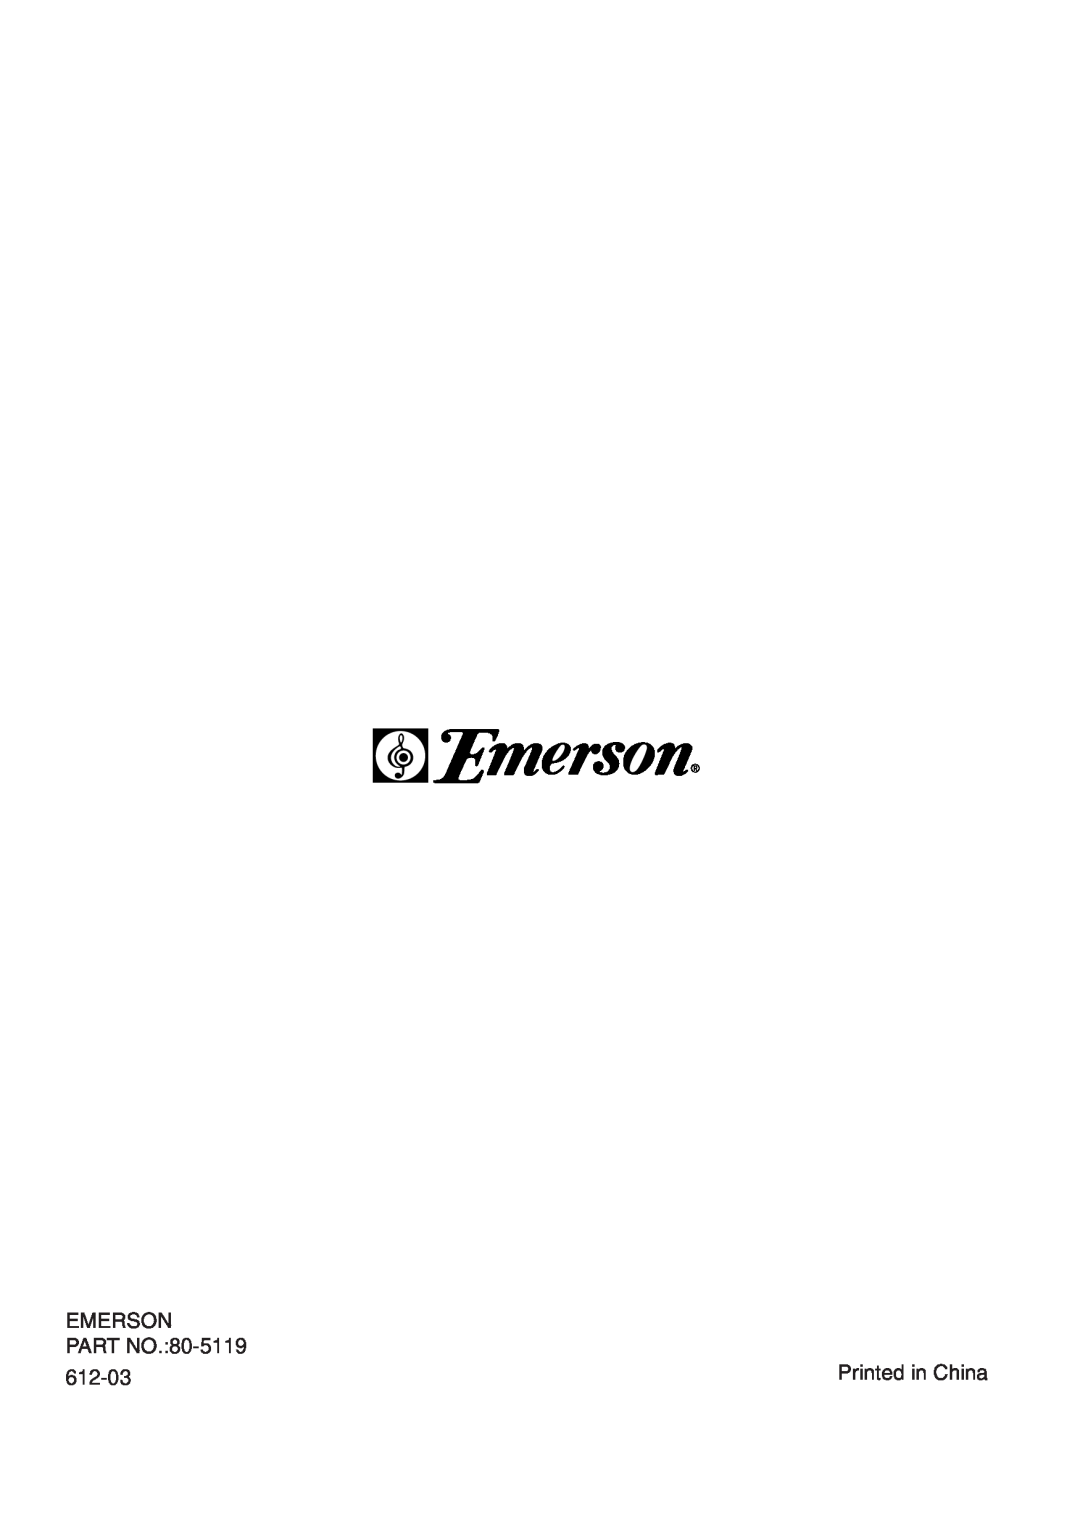 Emerson MW8115SS owner manual Emerson, PART NO.80-5119, 612-03 